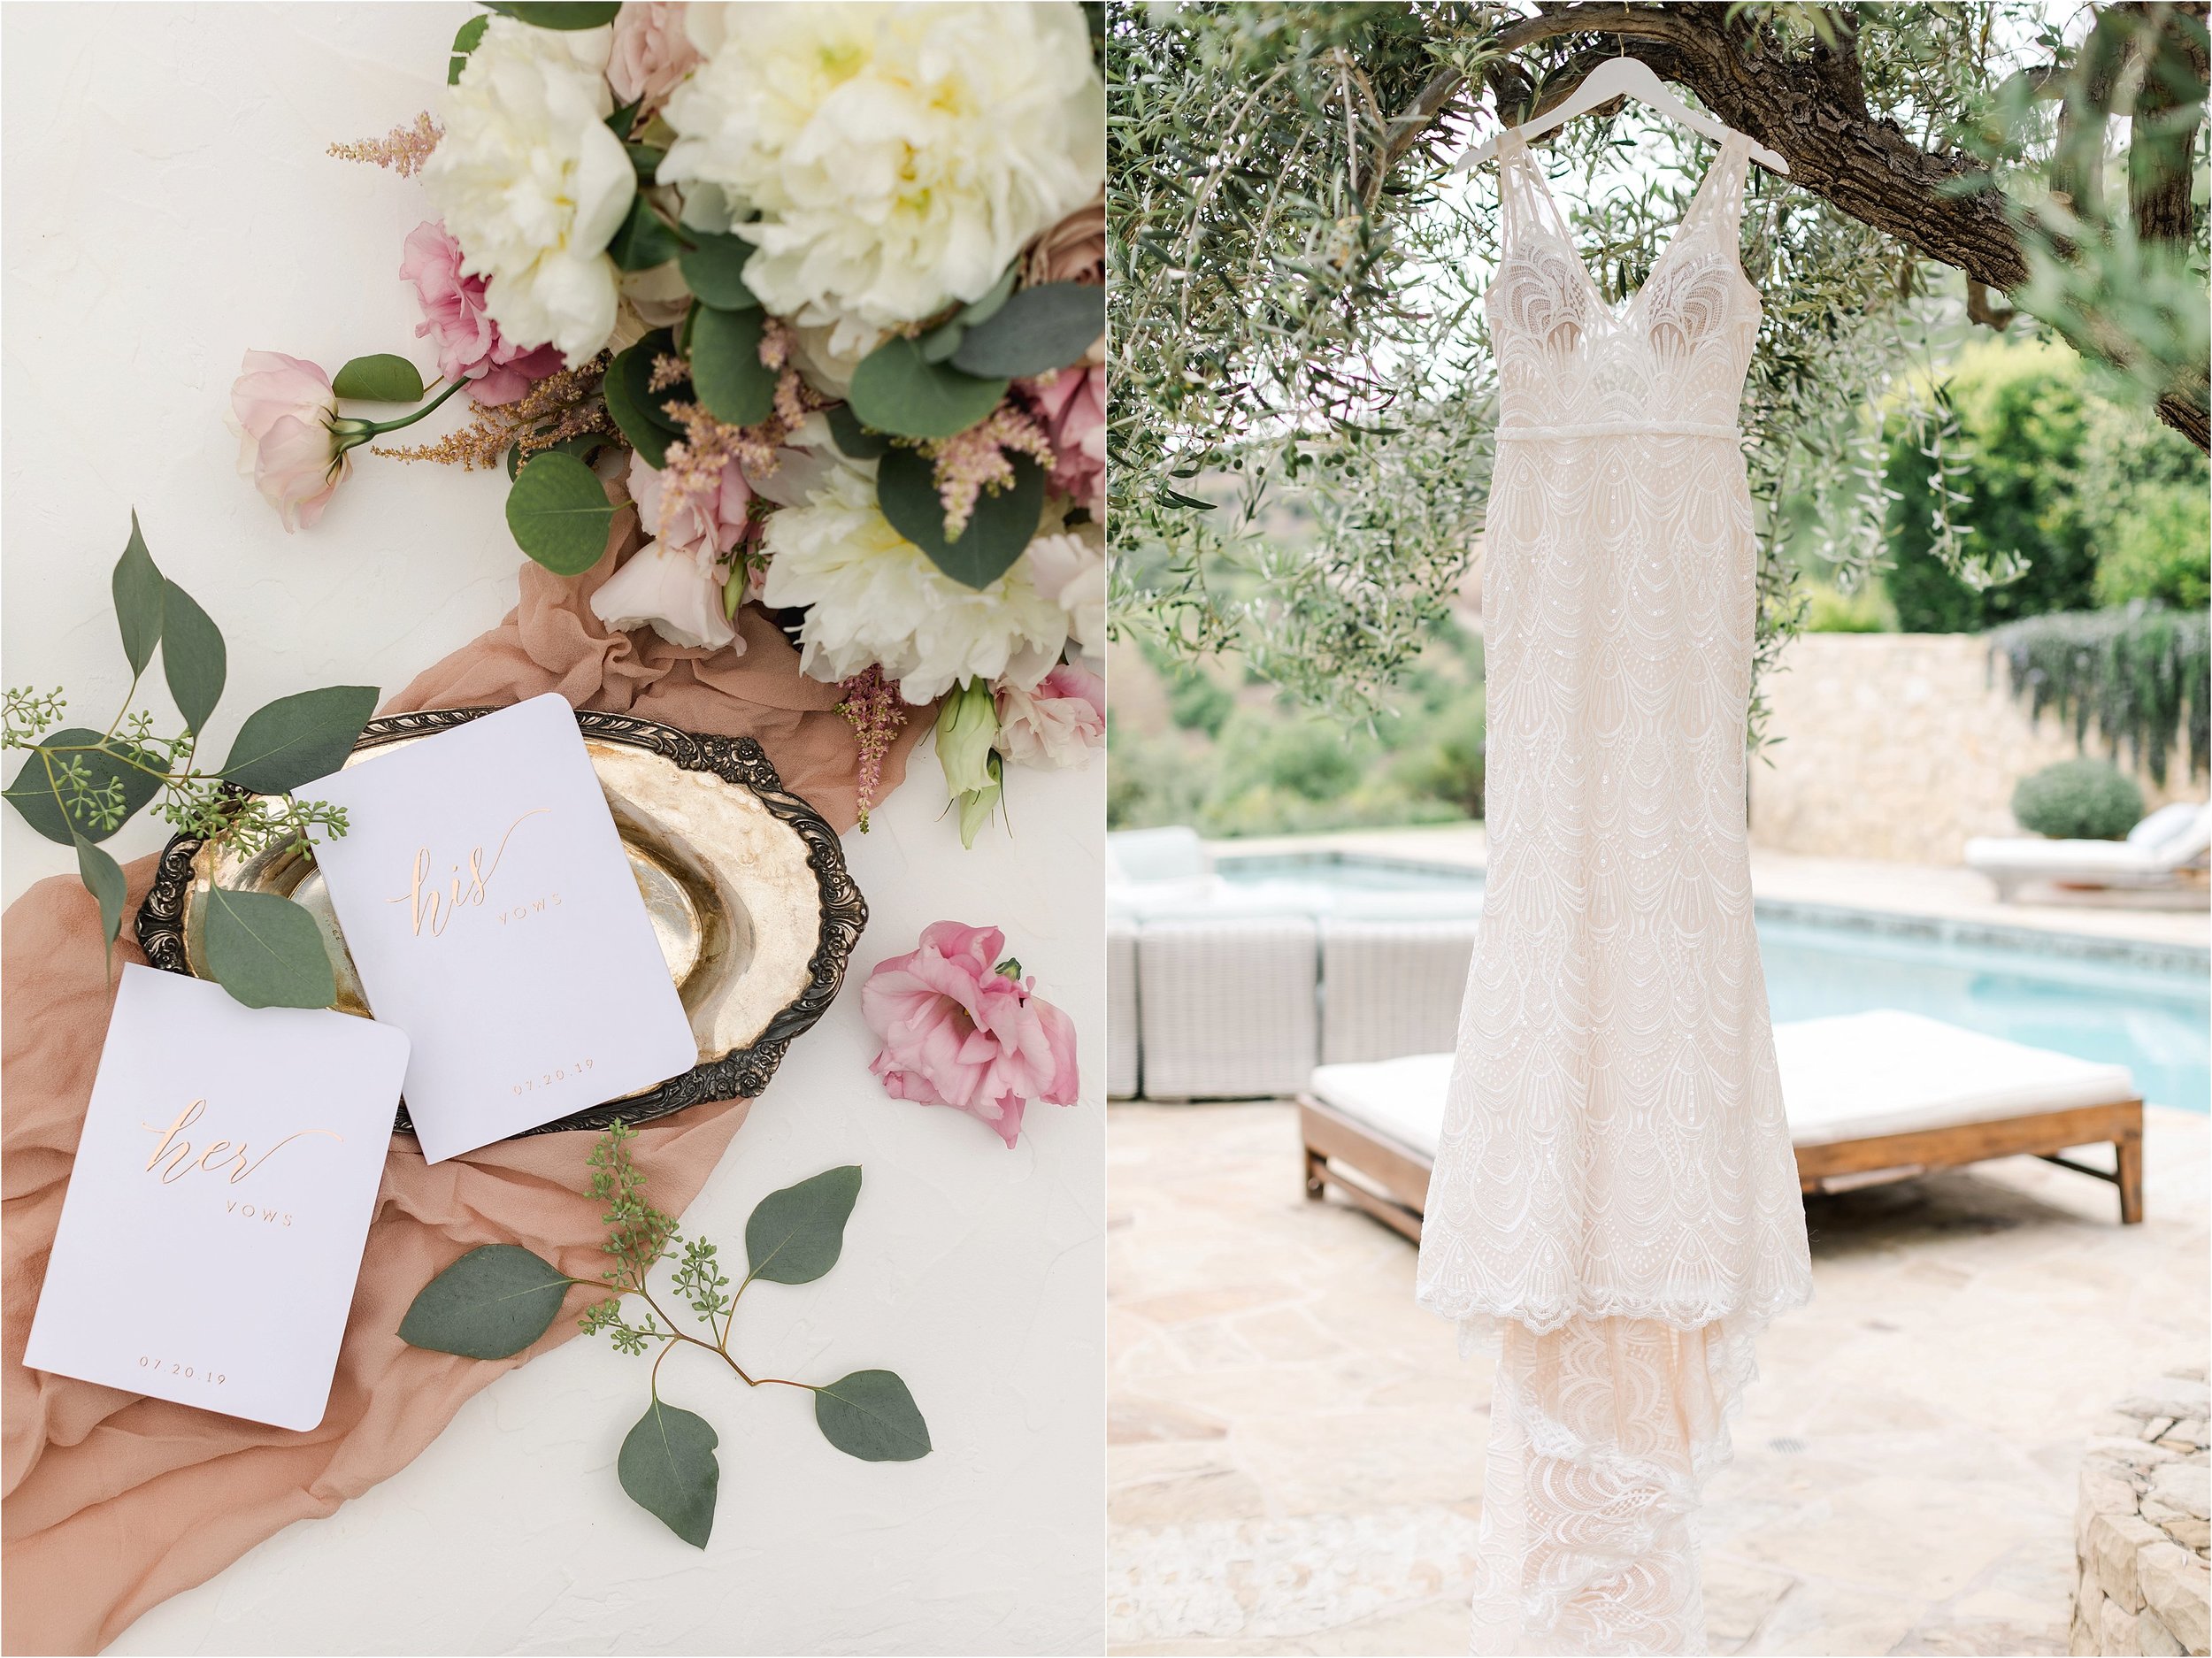 The image on the left shows a detail shot of the bride's bouquet with the bride and groom's vow books. The image on the right shows the bride's dress hanging from an olive tree at Klenter Ranch, one of the top Southern California private estate wedding venues.